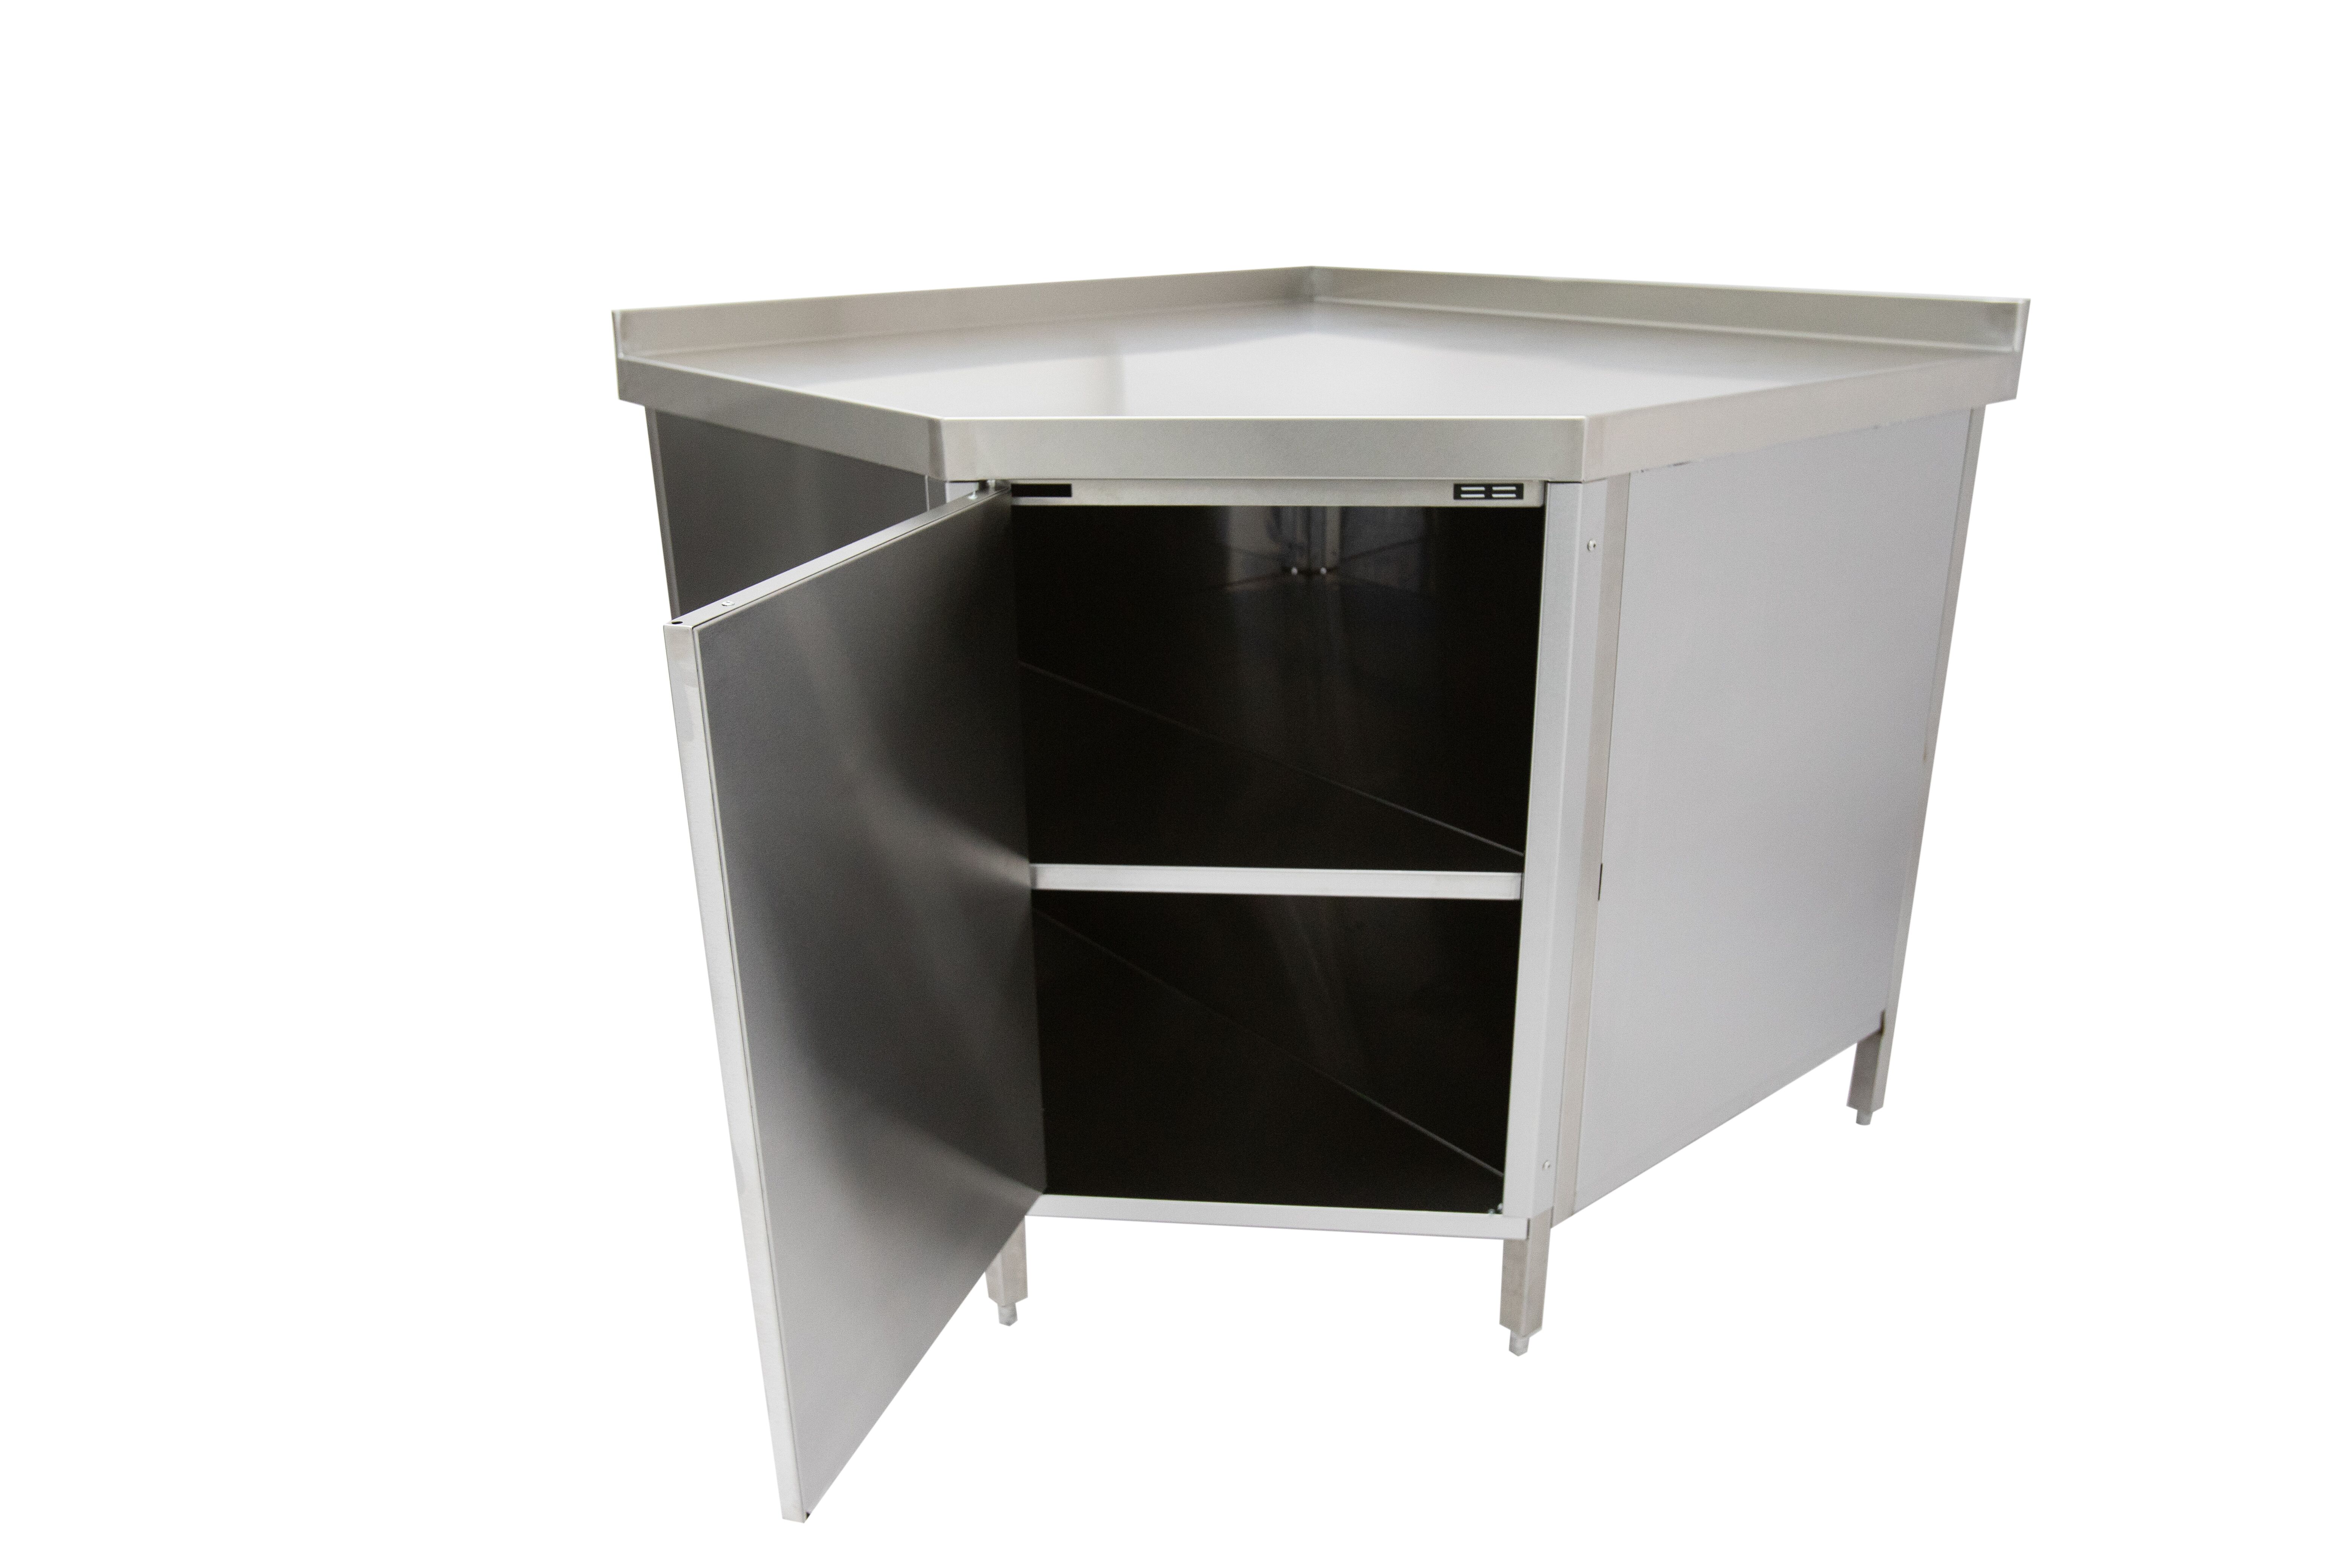 Parry CUPBD700 - Stainless Steel Corner Unit